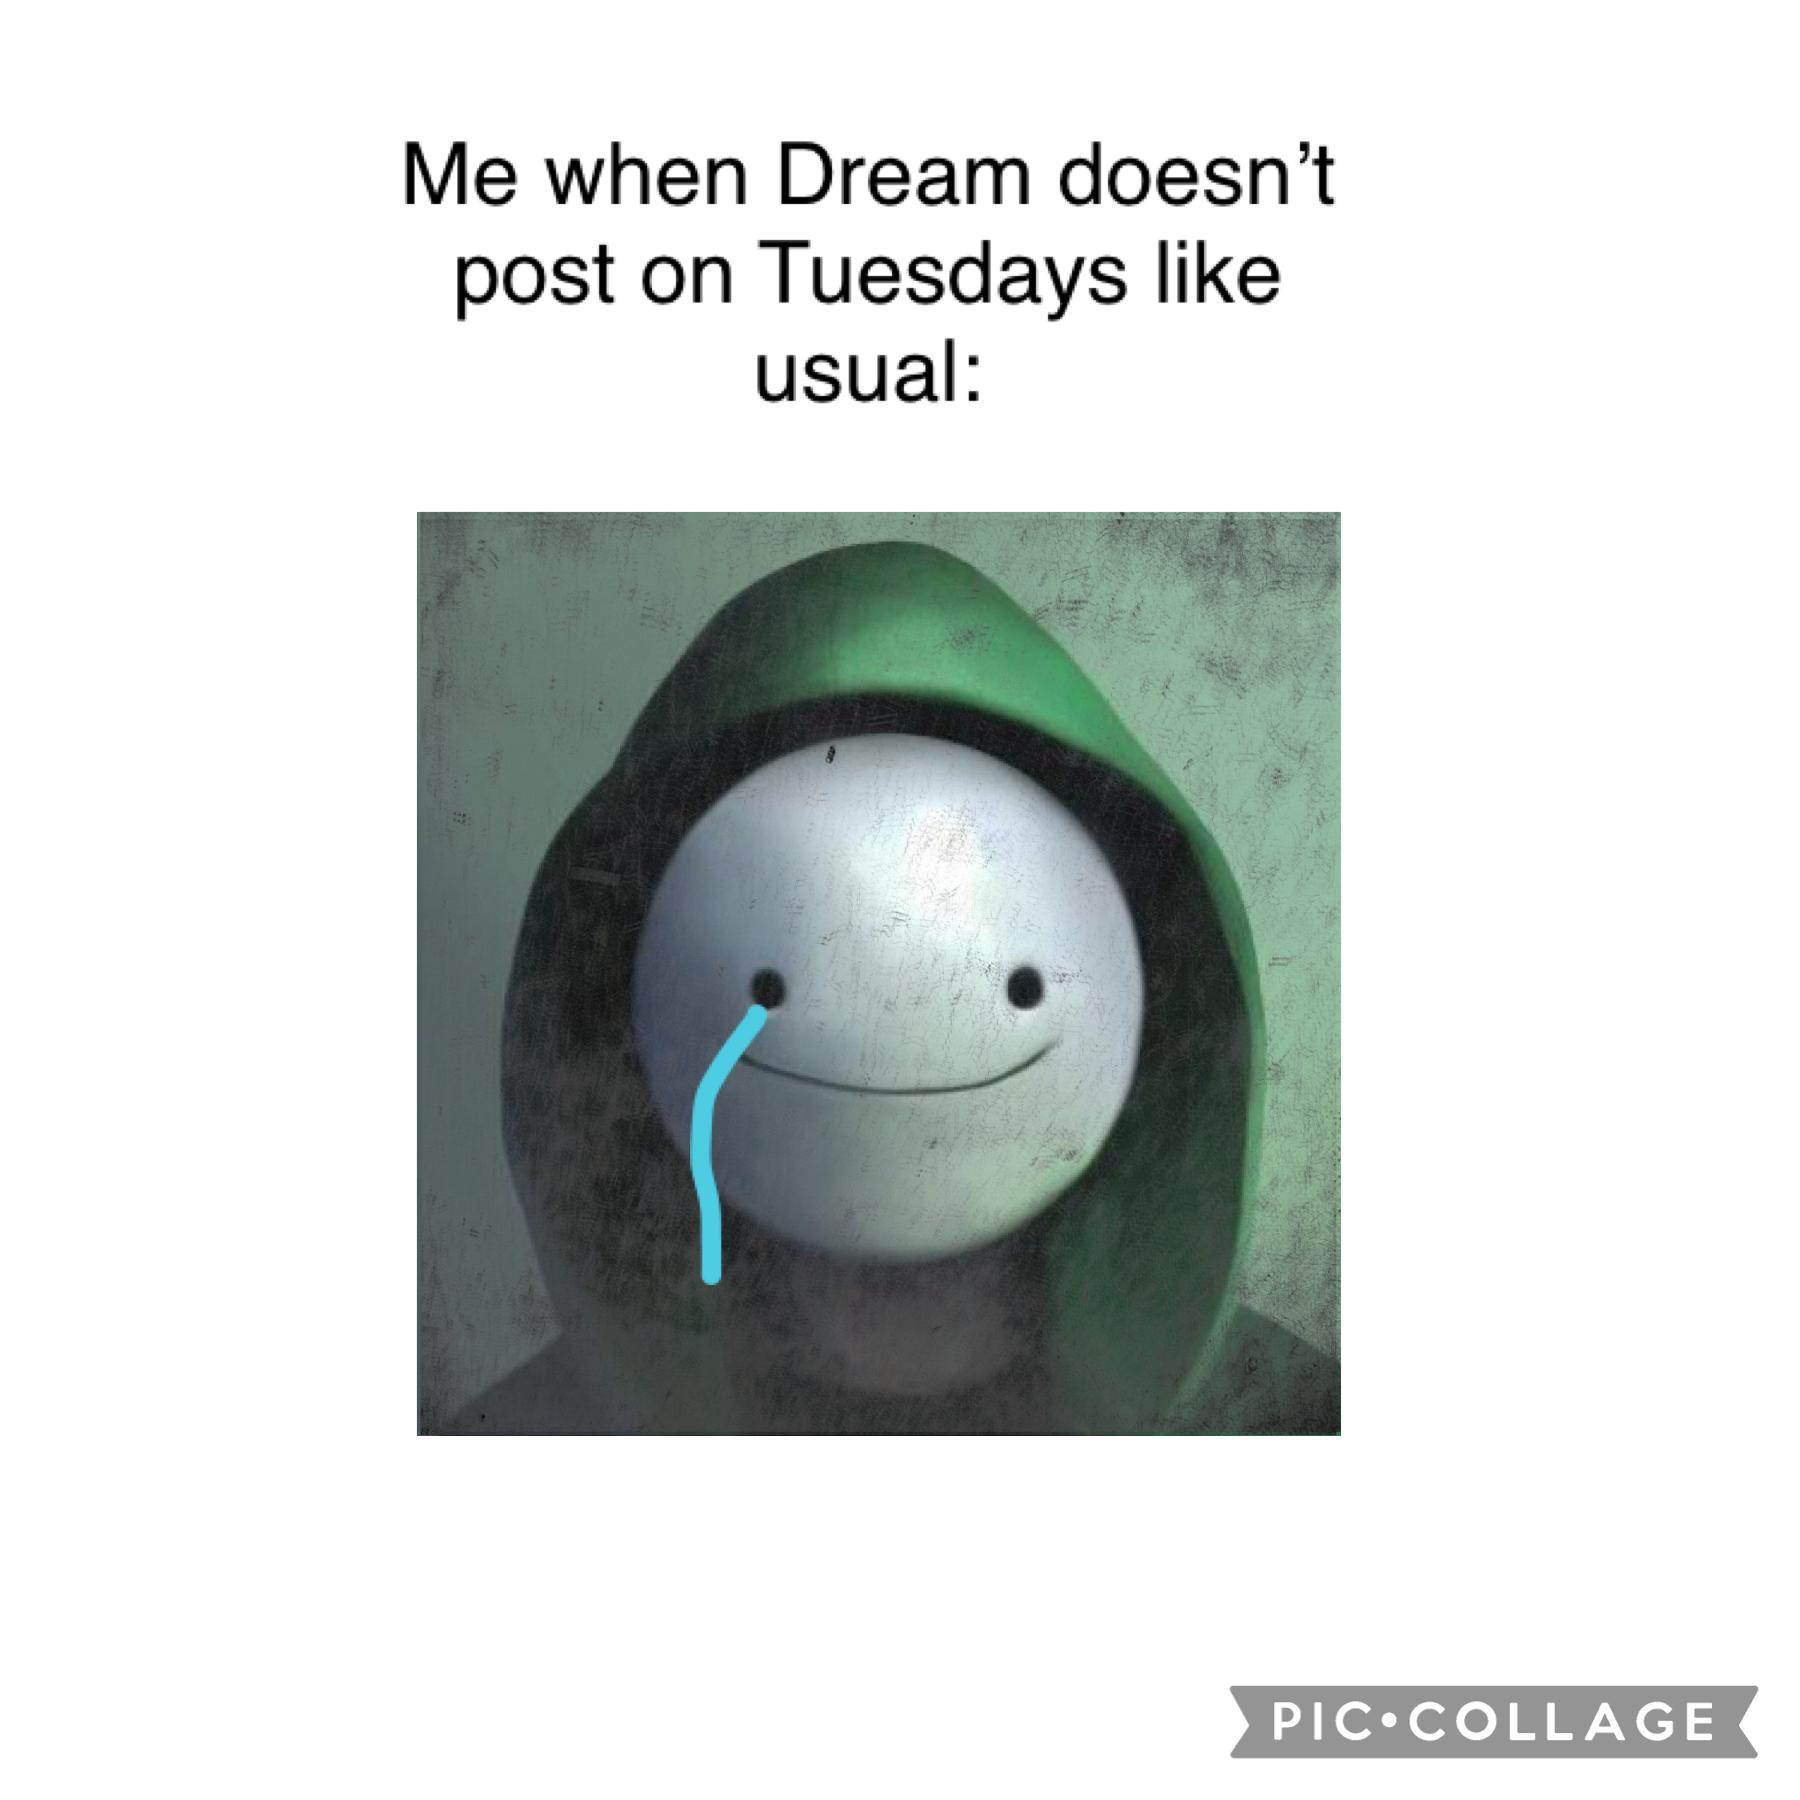 😭 so relatable 
Dream is so cool 